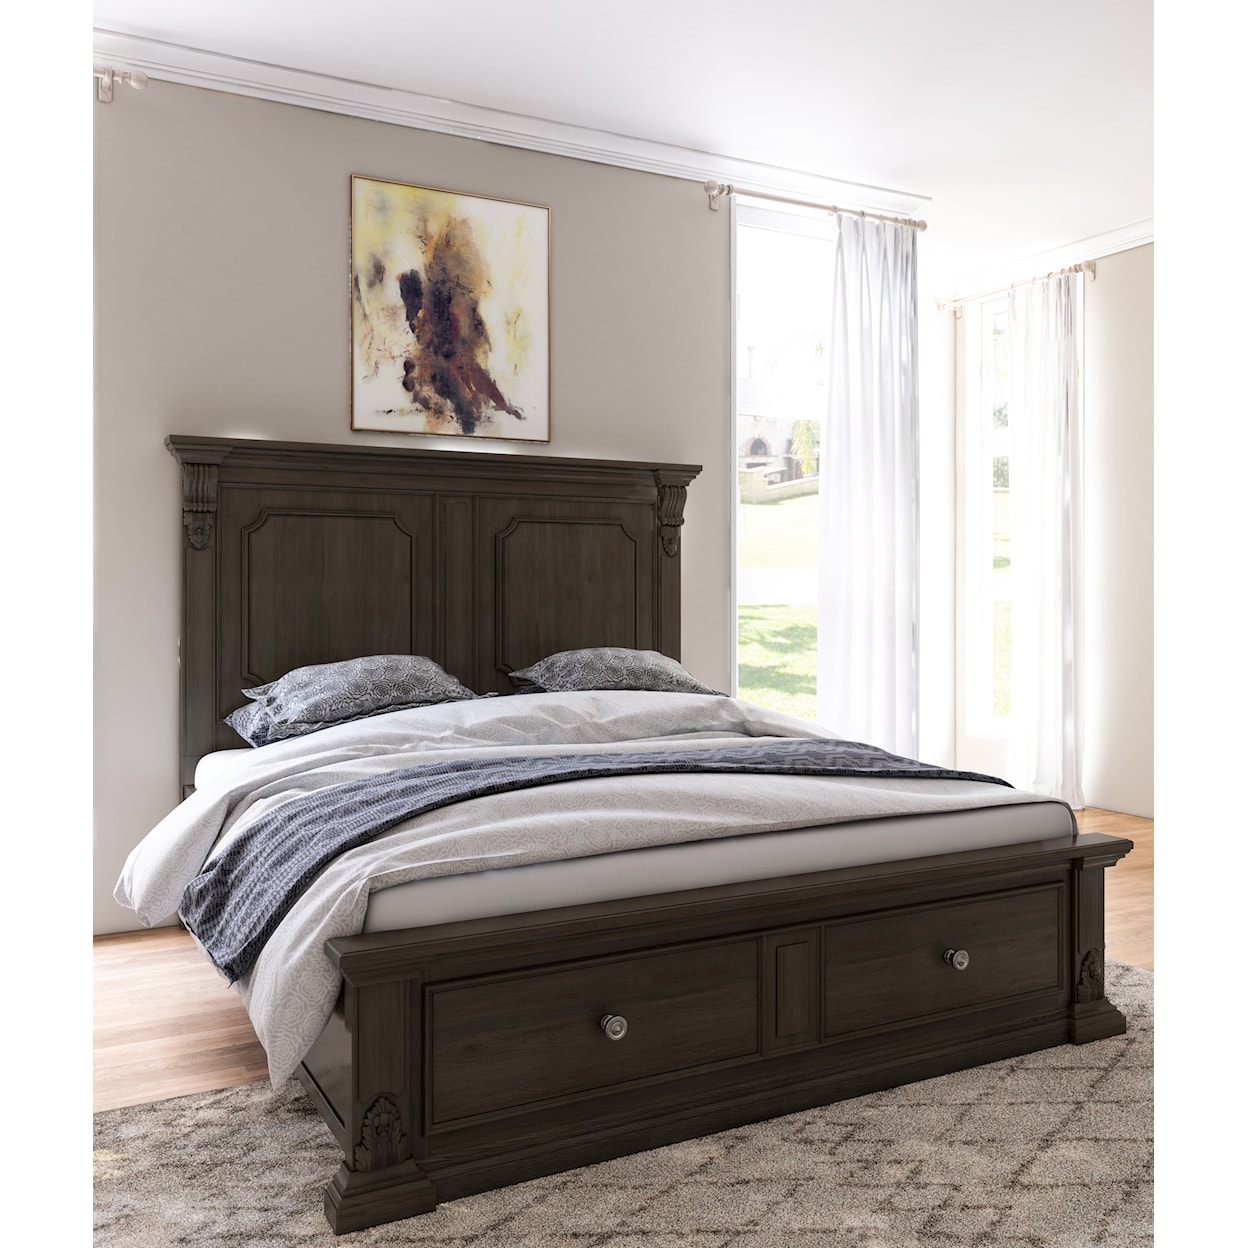 A.R.T. Furniture Inc 341 - Heritage Hill Queen Panel Bed with Footboard Storage